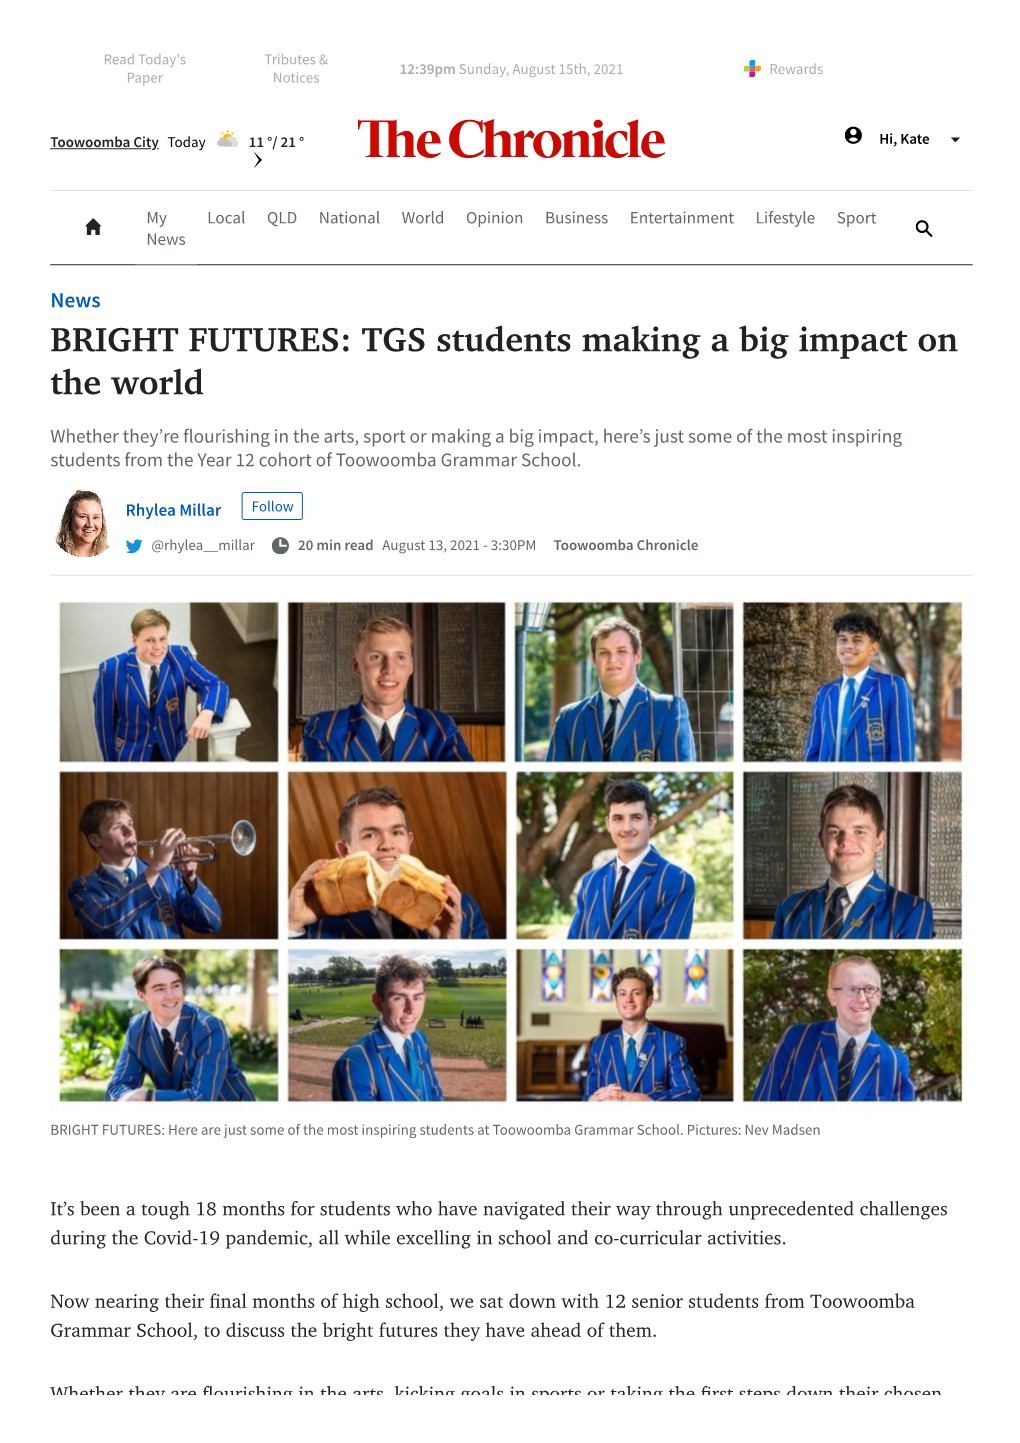 BRIGHT FUTURES: TGS Students Making a Big Impact on the World